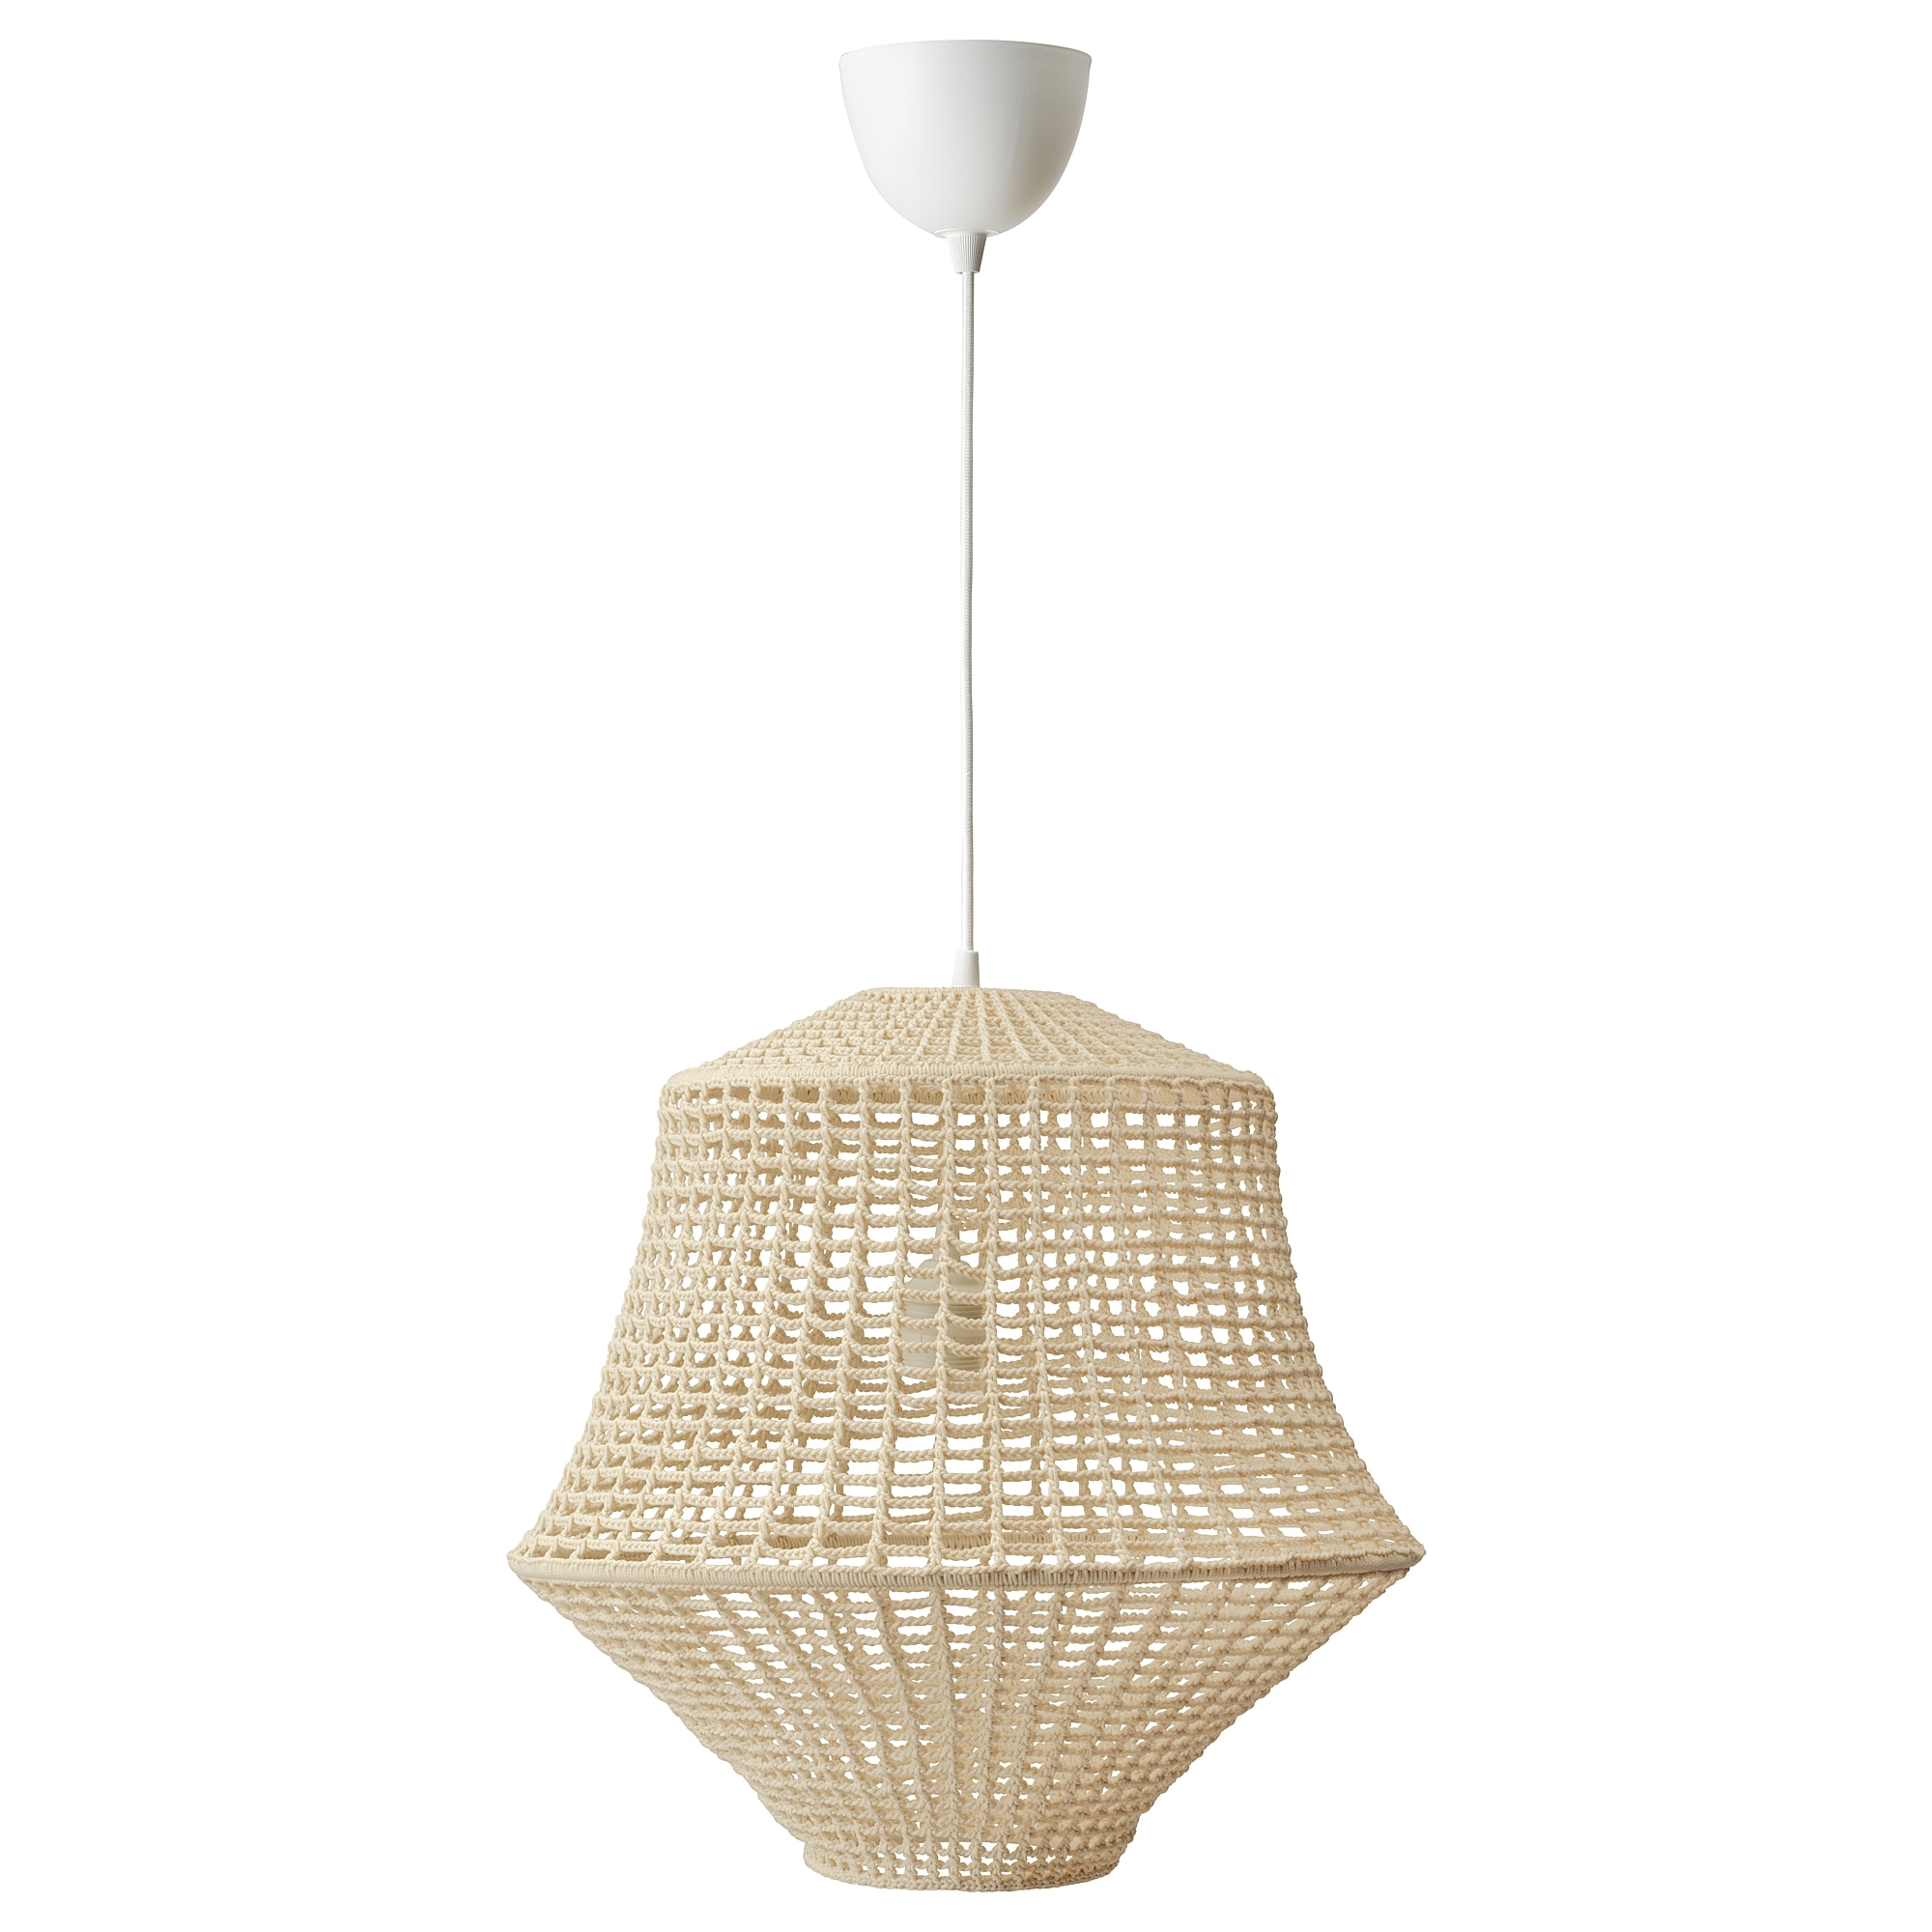 ikea industriell pendant lamp easy to take home since the pendant lamp comes in a flat